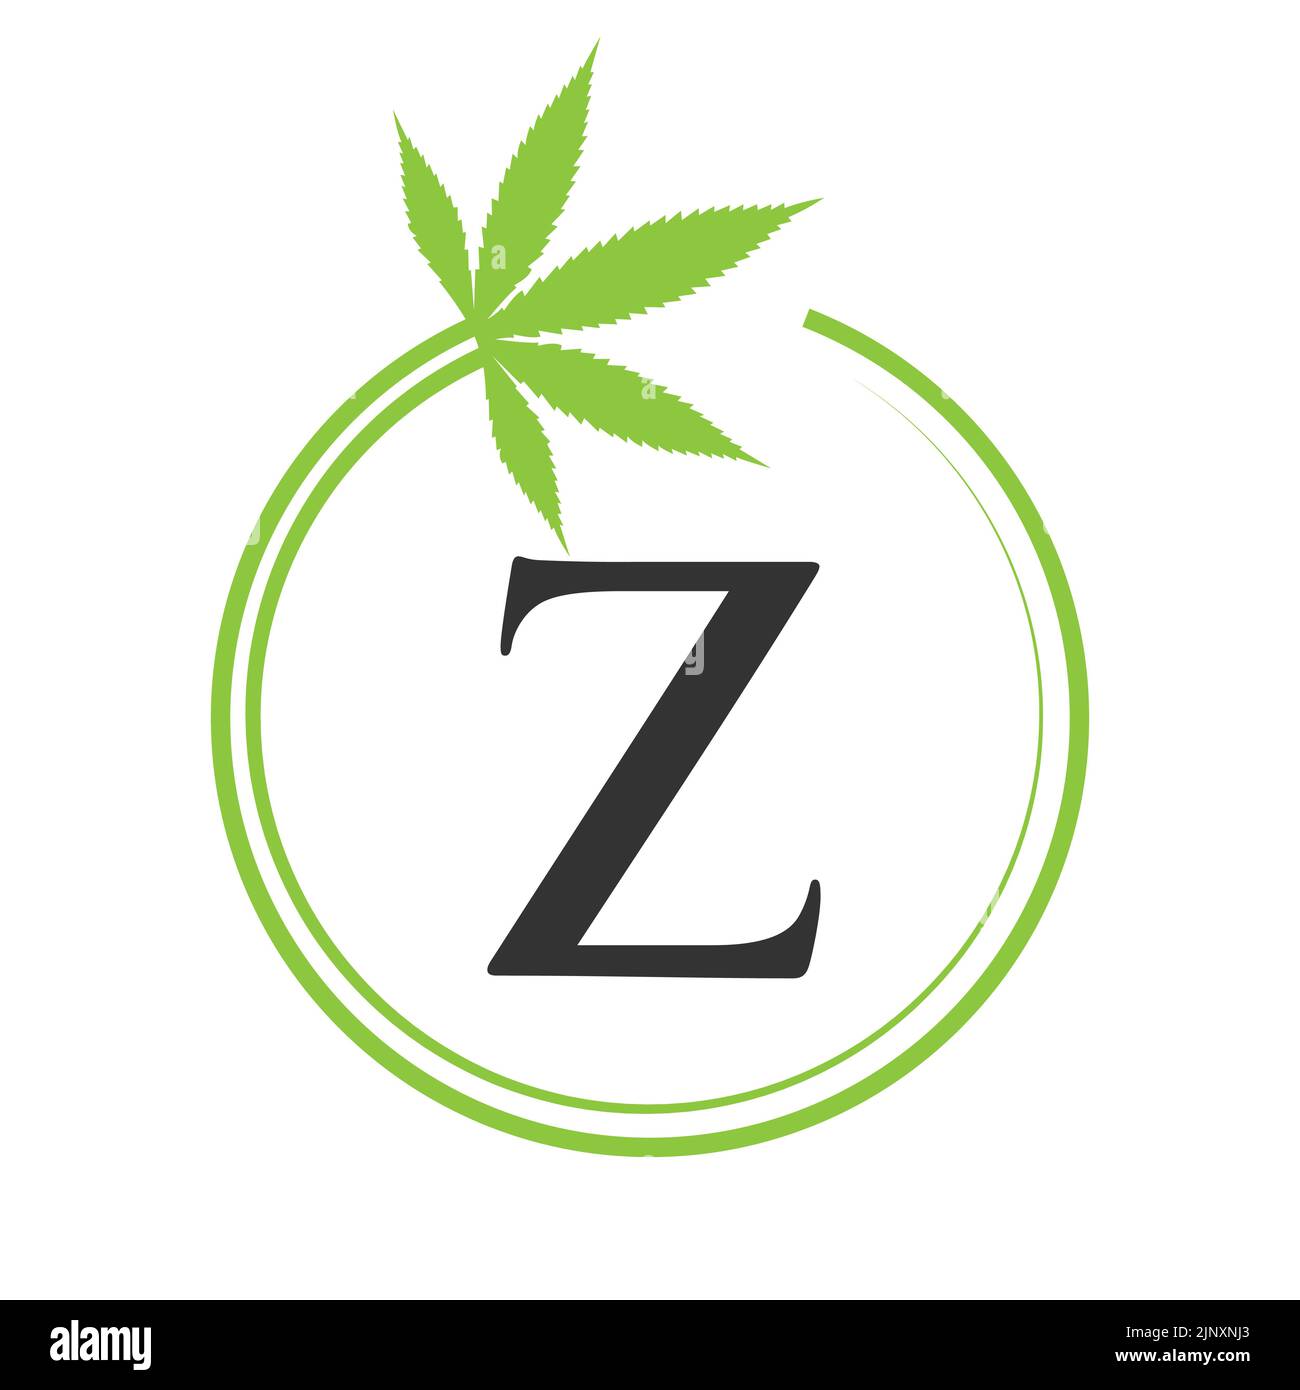 Cannabis Marijuana Logo on Letter Z Concept For Health and Medical Therapy. Marijuana, Cannabis Sign Template Stock Vector